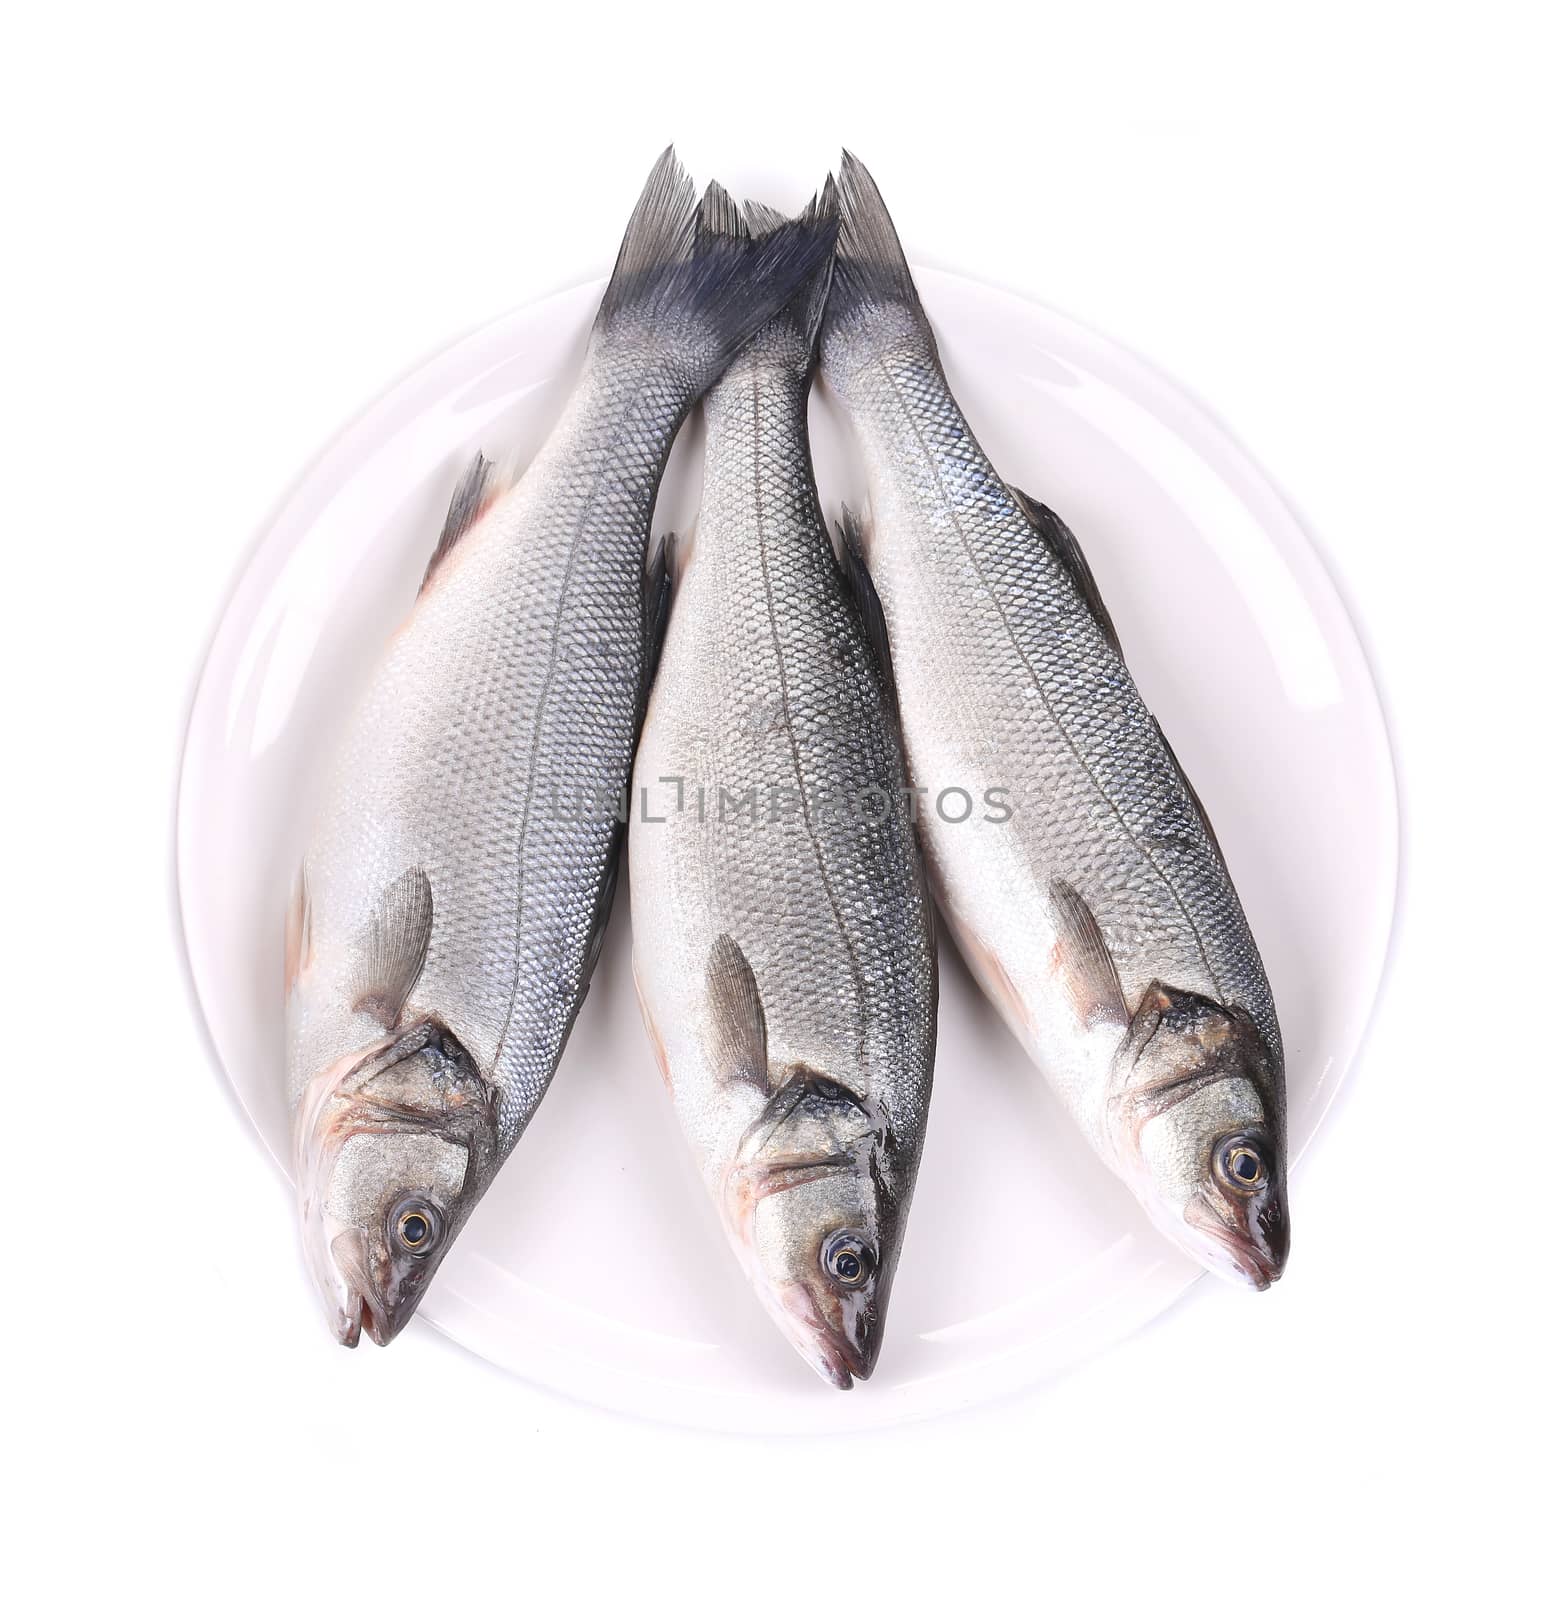 Three fresh seabass fish on plate. Isolated on a white background.